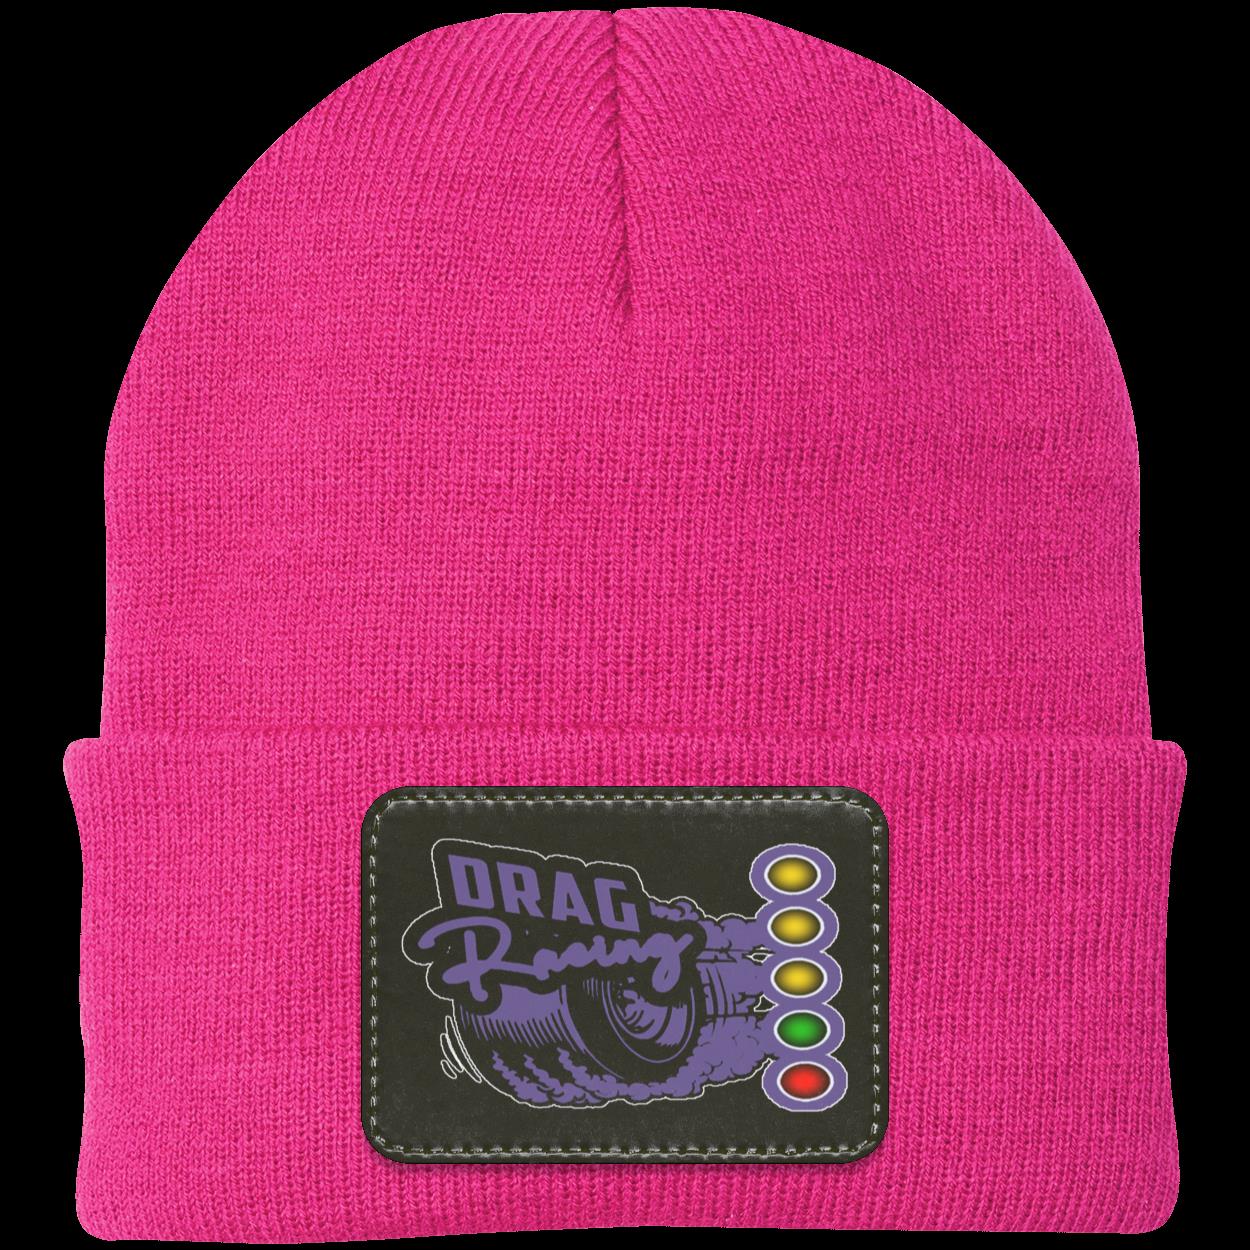 Drag Racing Patched Knit Cap V1